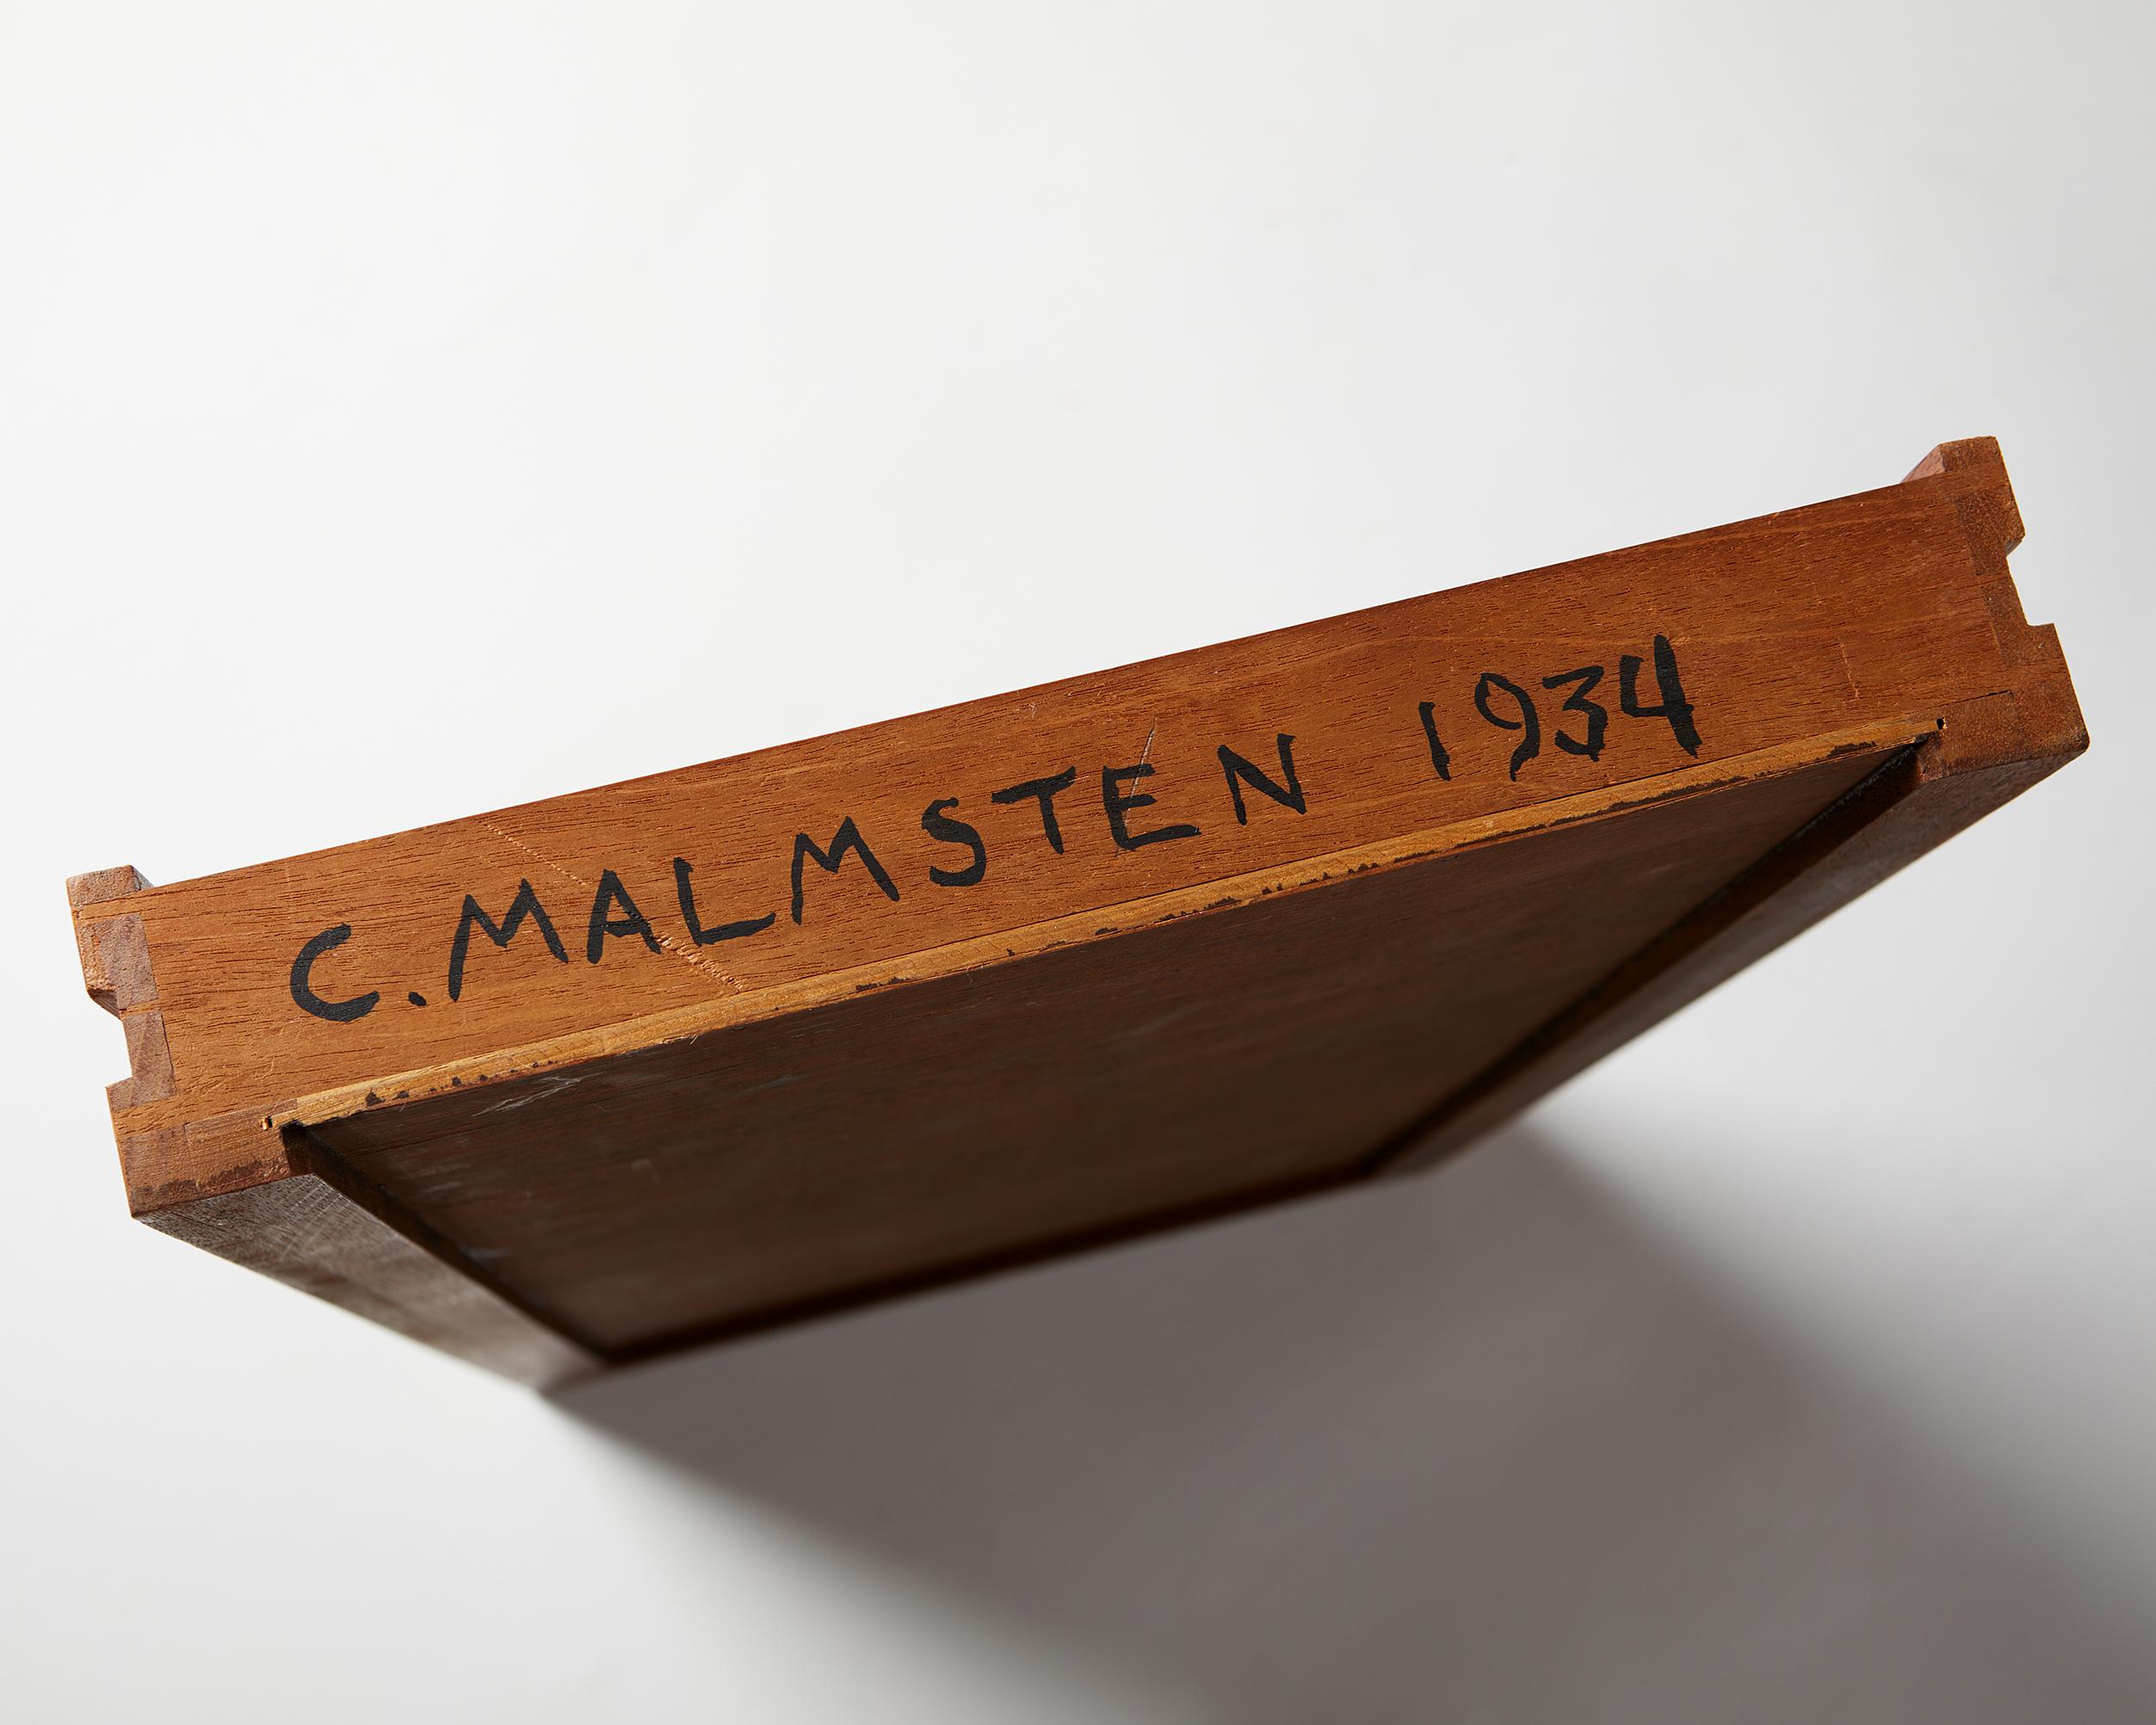 Desk made of Mahogany and Walnut Designed by Carl Malmsten, Sweden, 1934 6